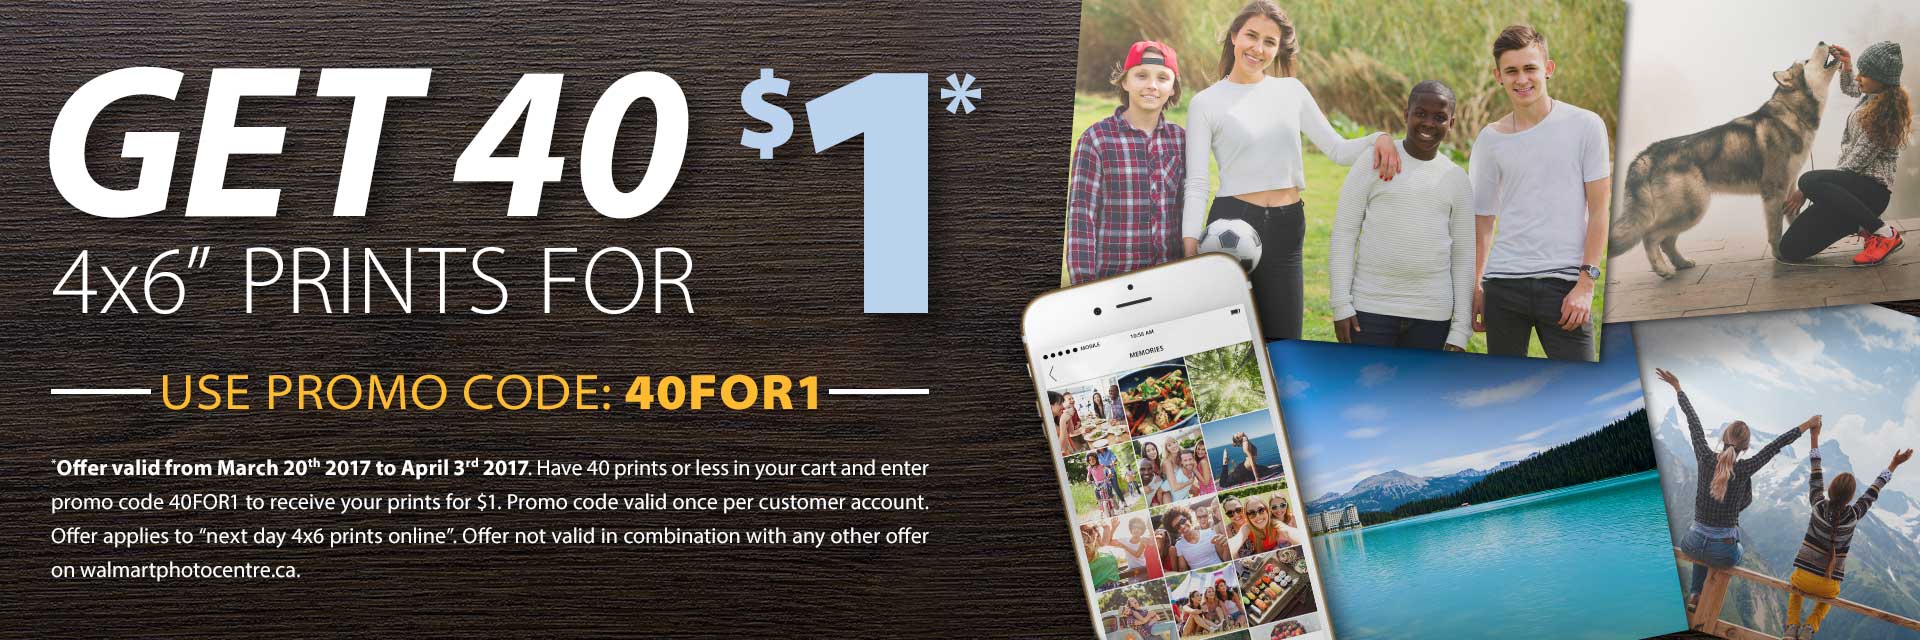 Walmart Photo Centre Canada Get 40 4x6 Photos For Just 1 Canadian